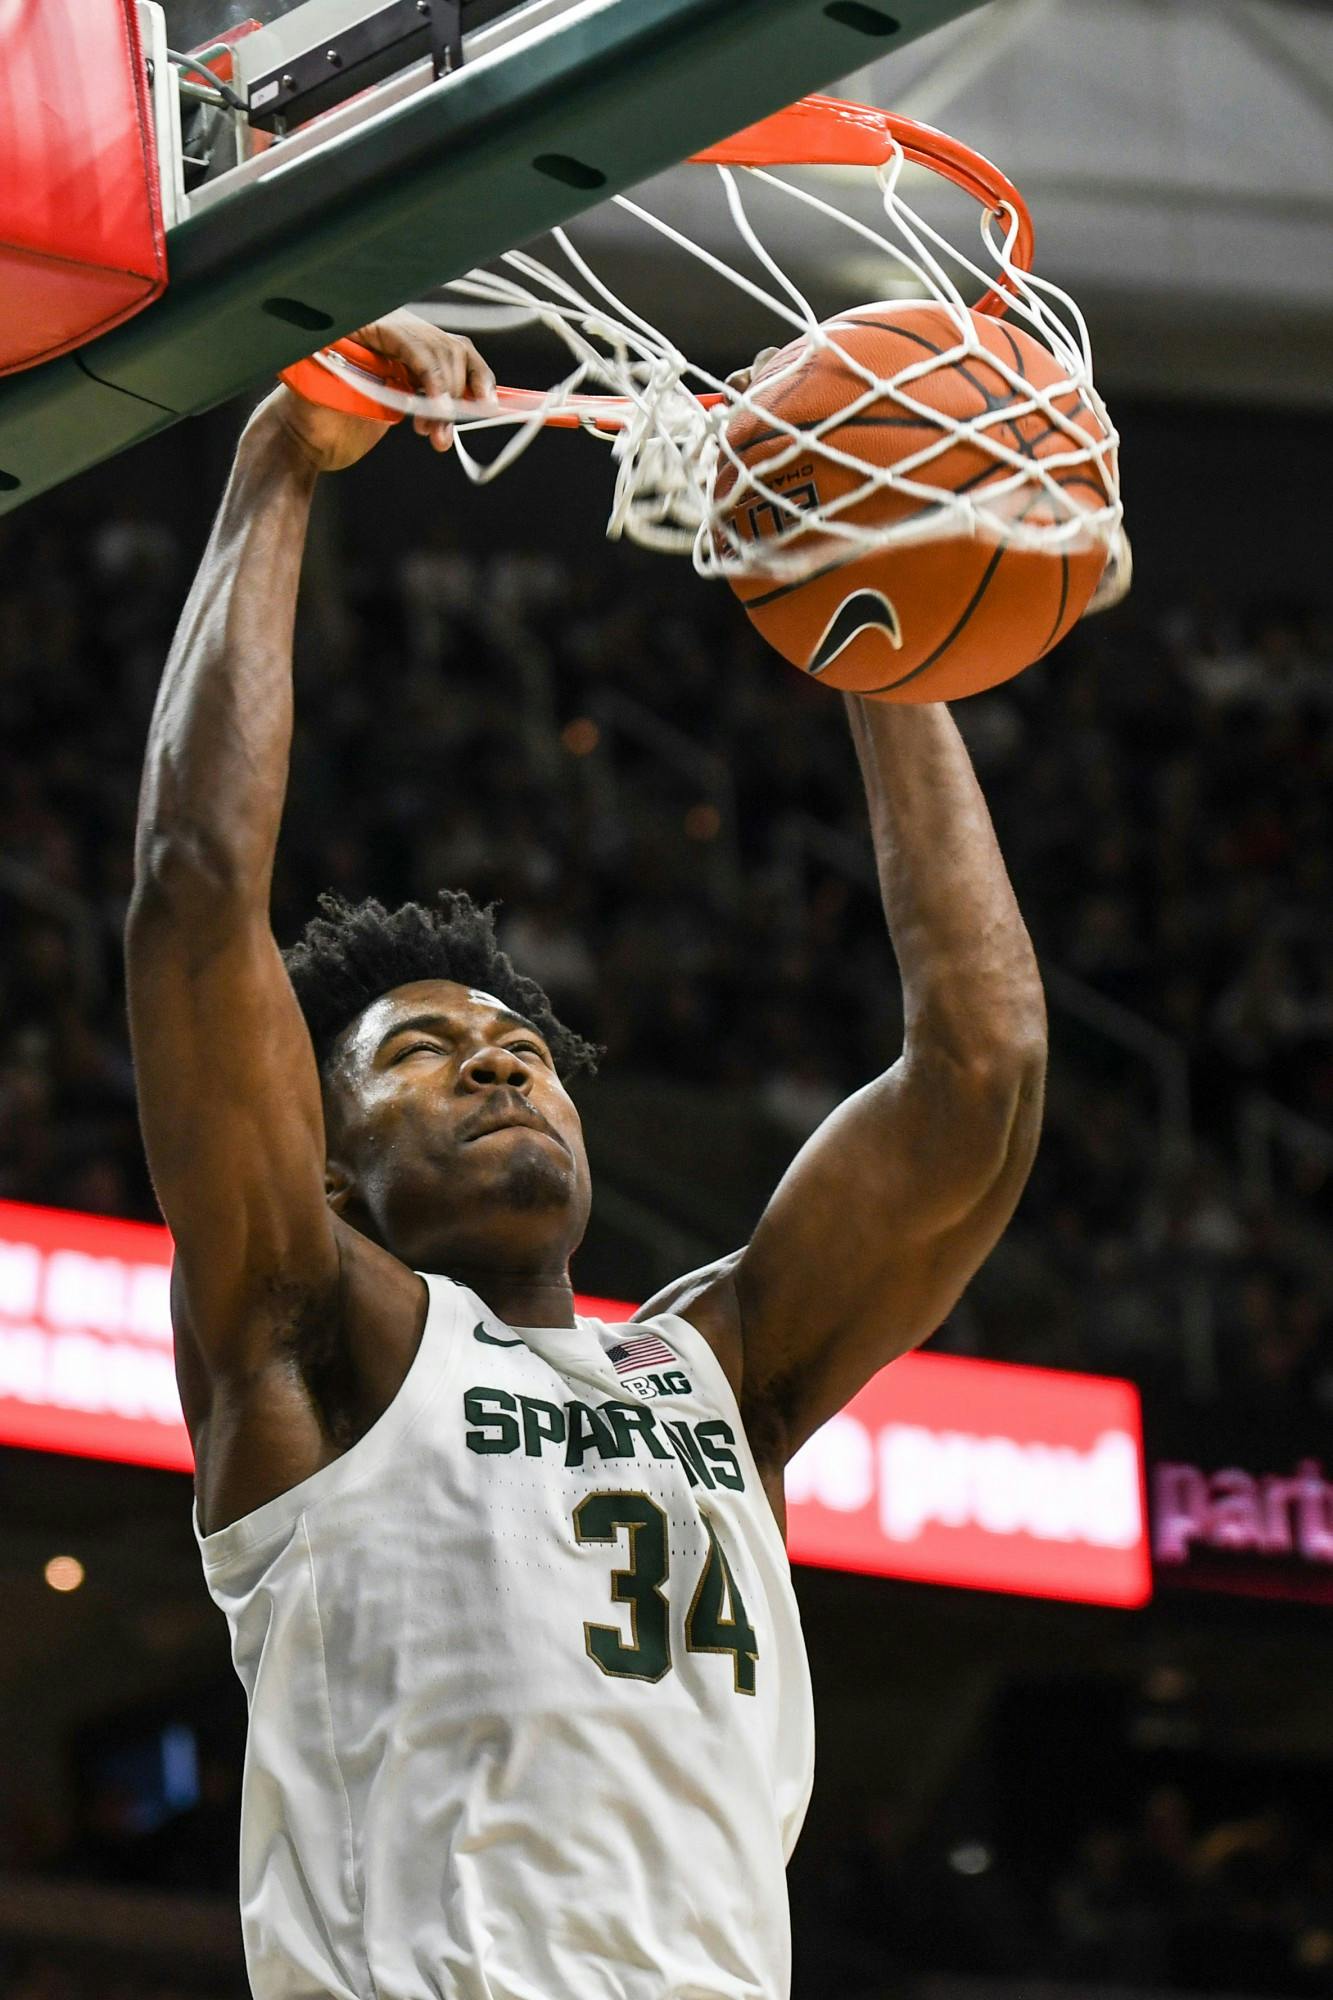 <p>Freshman forward Julius Marble (34) dunks during the game against Eastern Michigan on Dec. 21, 2019 at the Breslin Center. The Spartans defeated the Eagles, 101-48.</p>